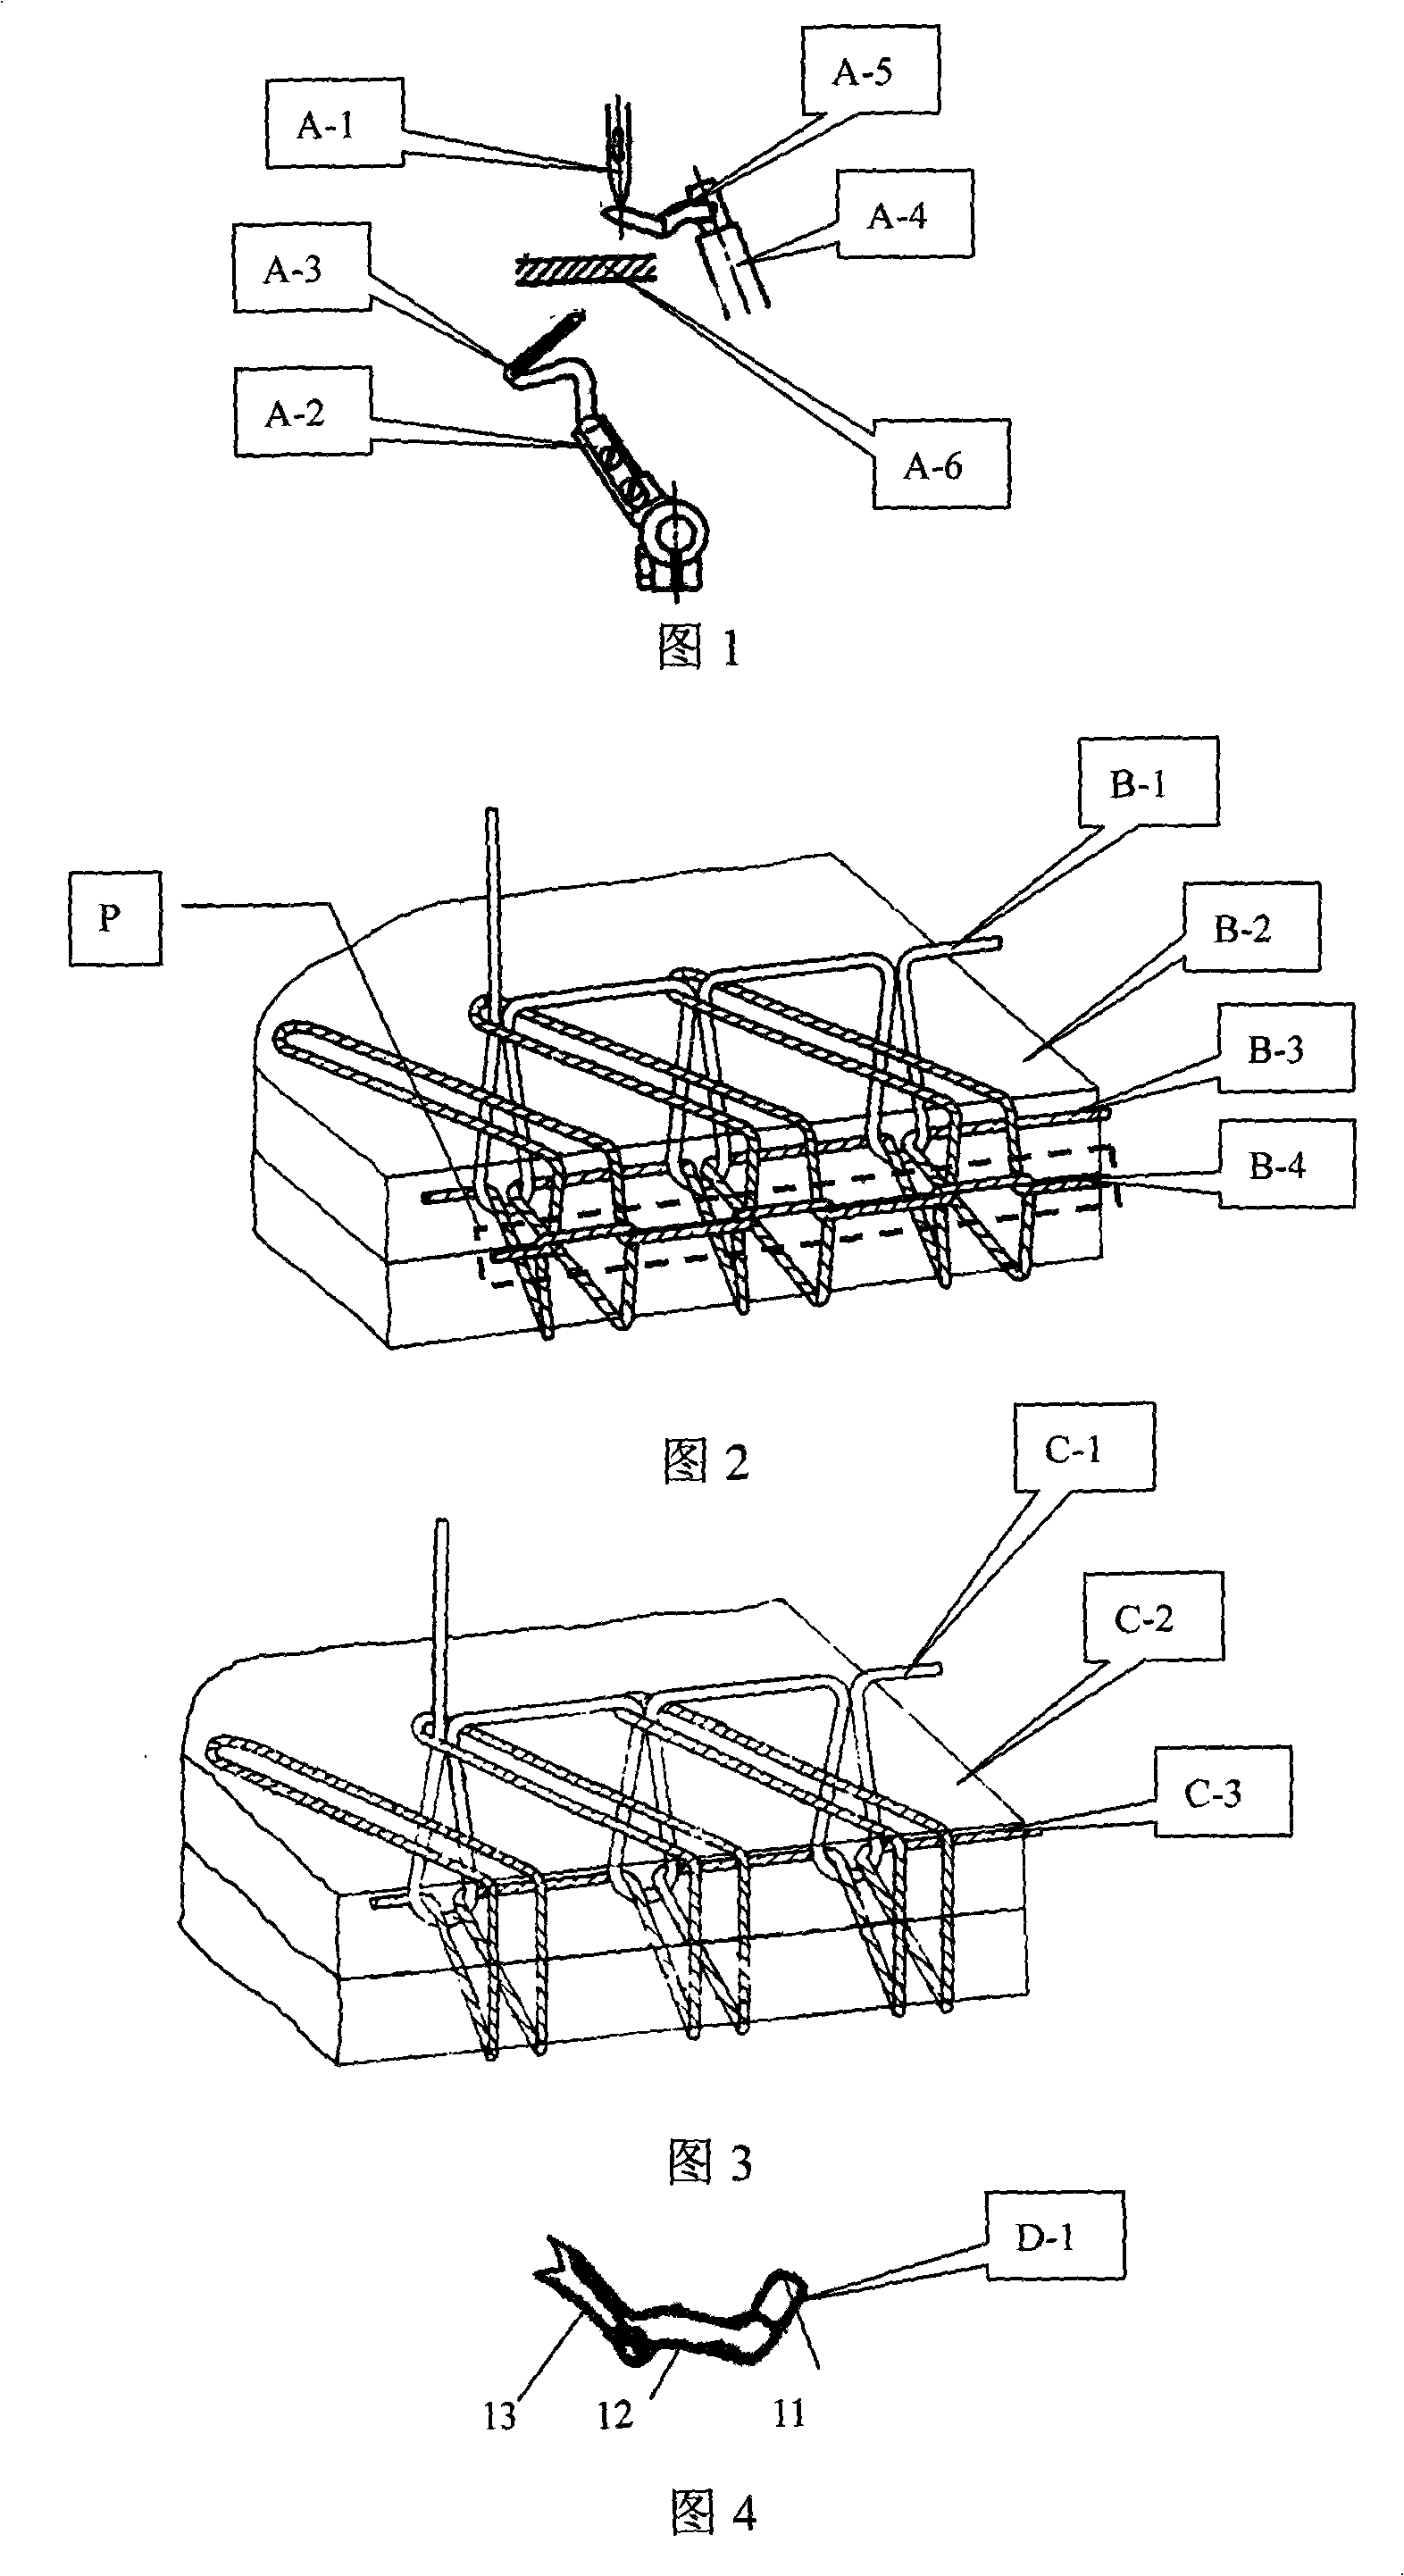 Wrapping executing structure of high-density over lock machine of cup seaming machine